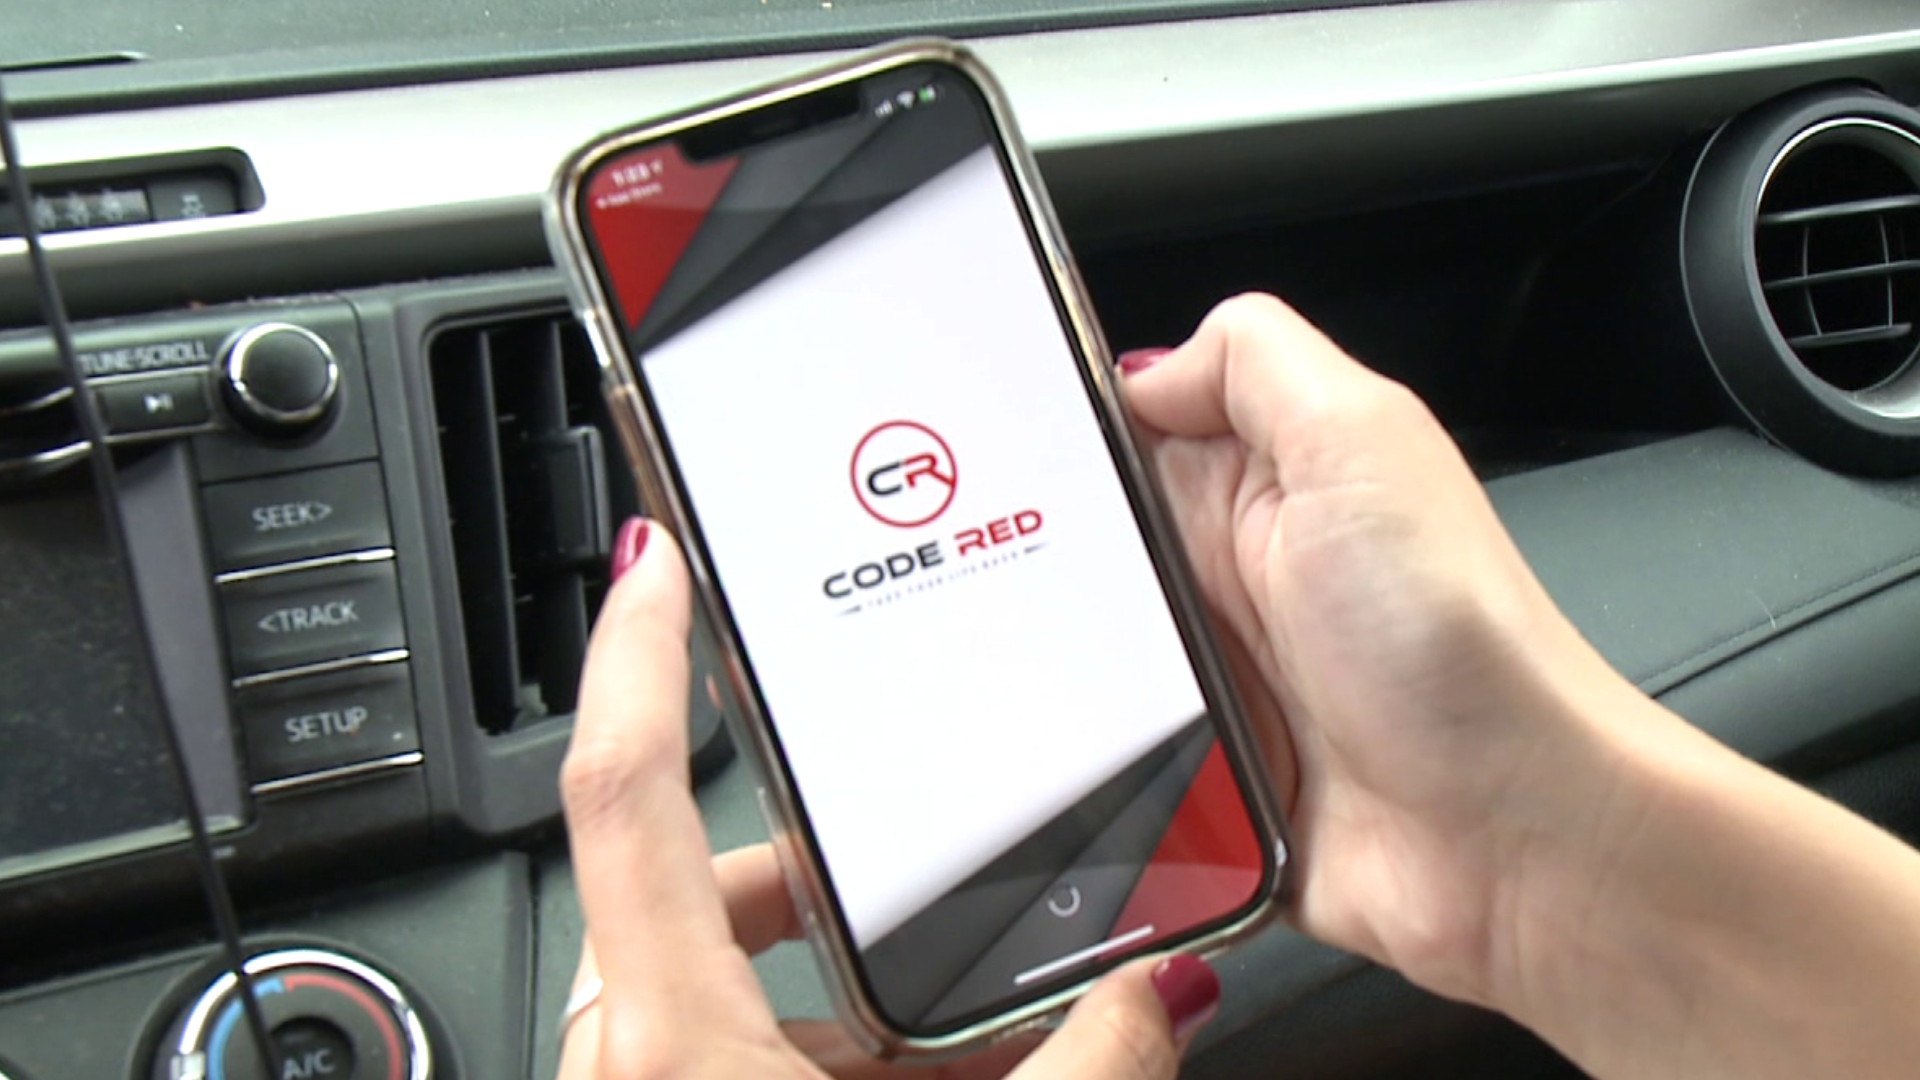 The Code Red app is now an option for folks in the city of Hazleton to stay up to speed on things happening in the city.